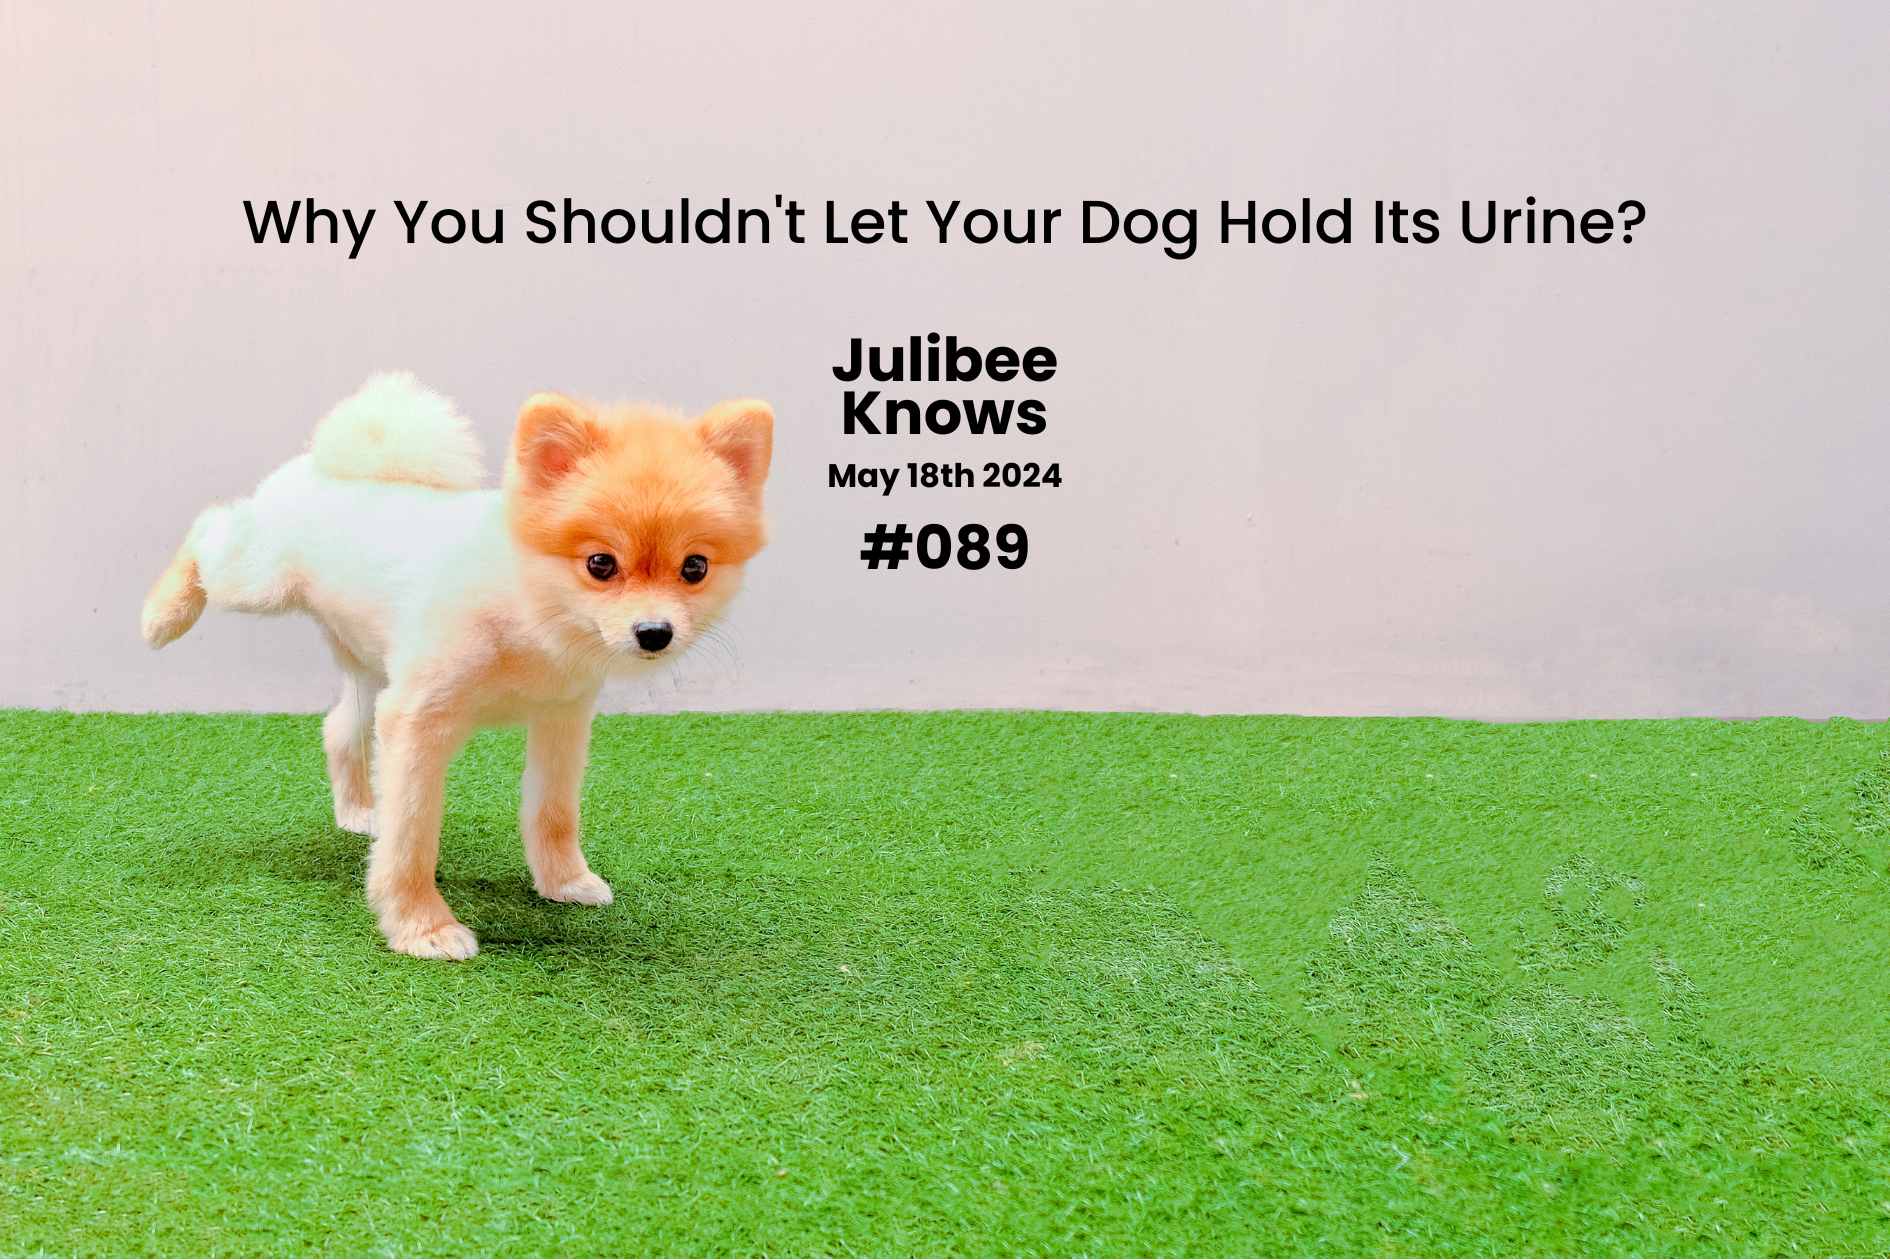 Why You Shouldn't Let Your Dog Hold Its Urine